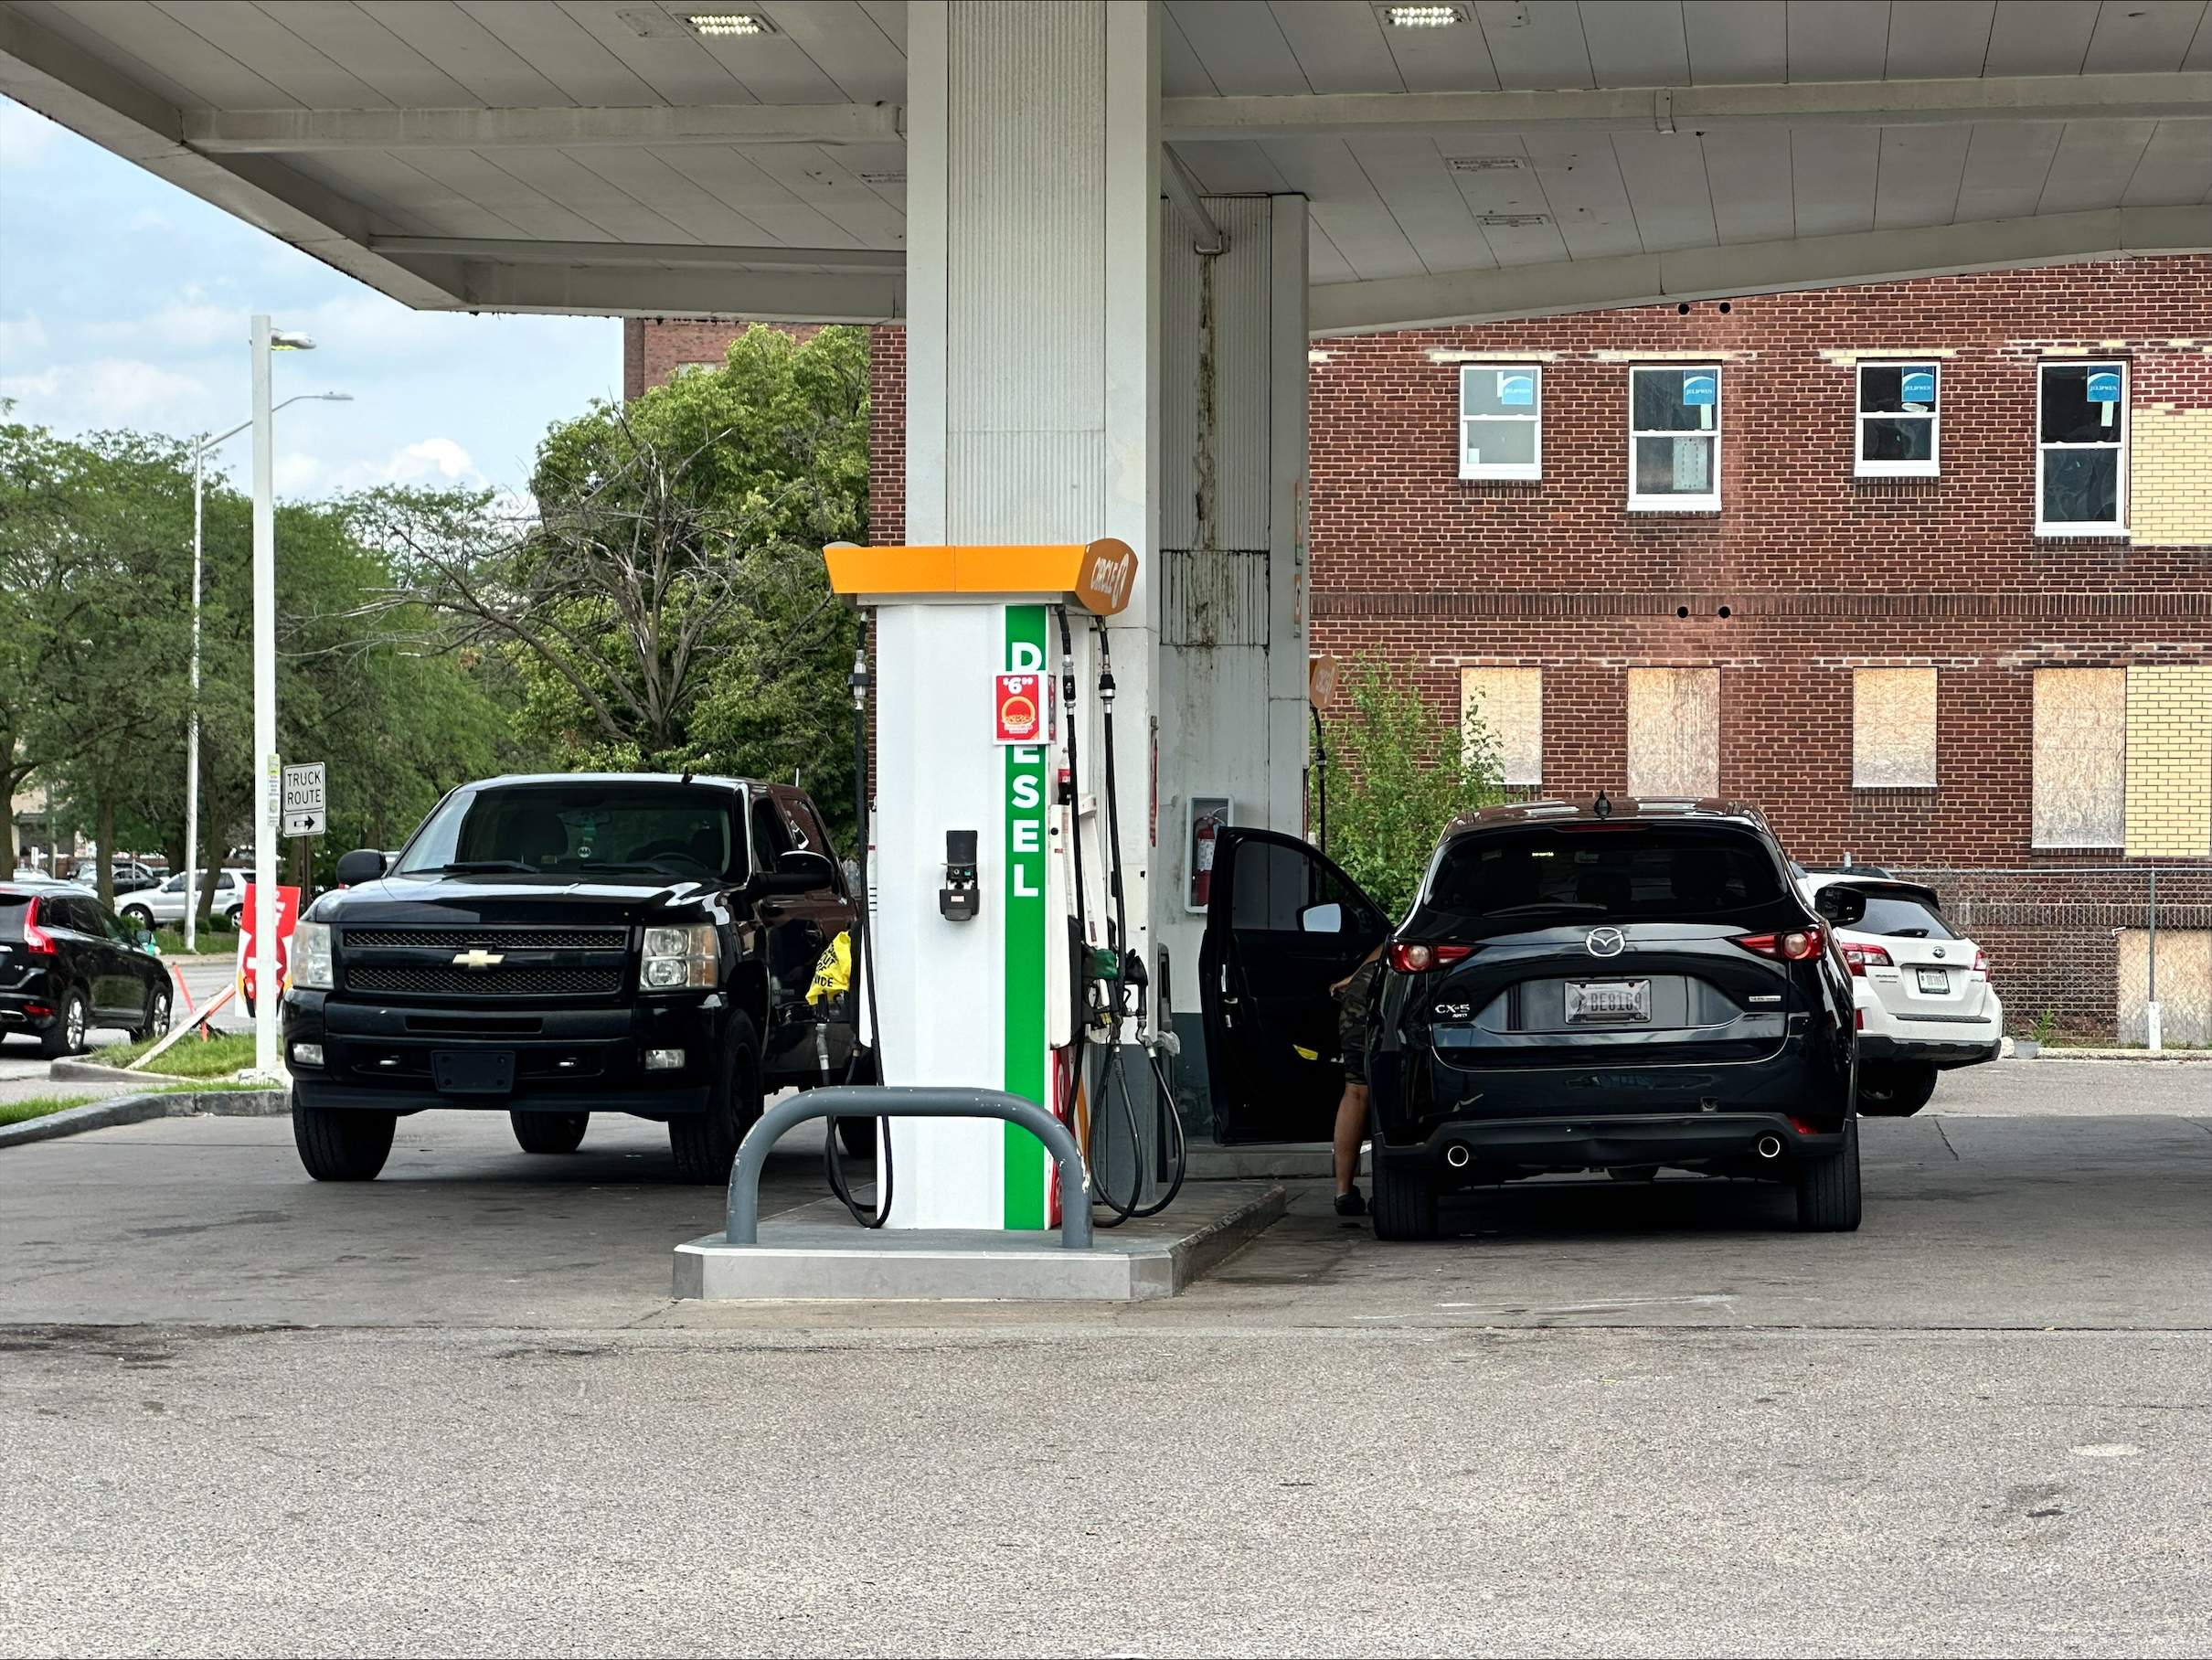 Circle K, the global convenience store chain, on May 23, 2204, lowered gas prices by 40 cents per gallon natiionally between 4 p.m. and 7 p.m. local time. Here is a view from the station at 16th and Illinois streets in Indianapolis. (WISH Photo/Jason Ronimous)